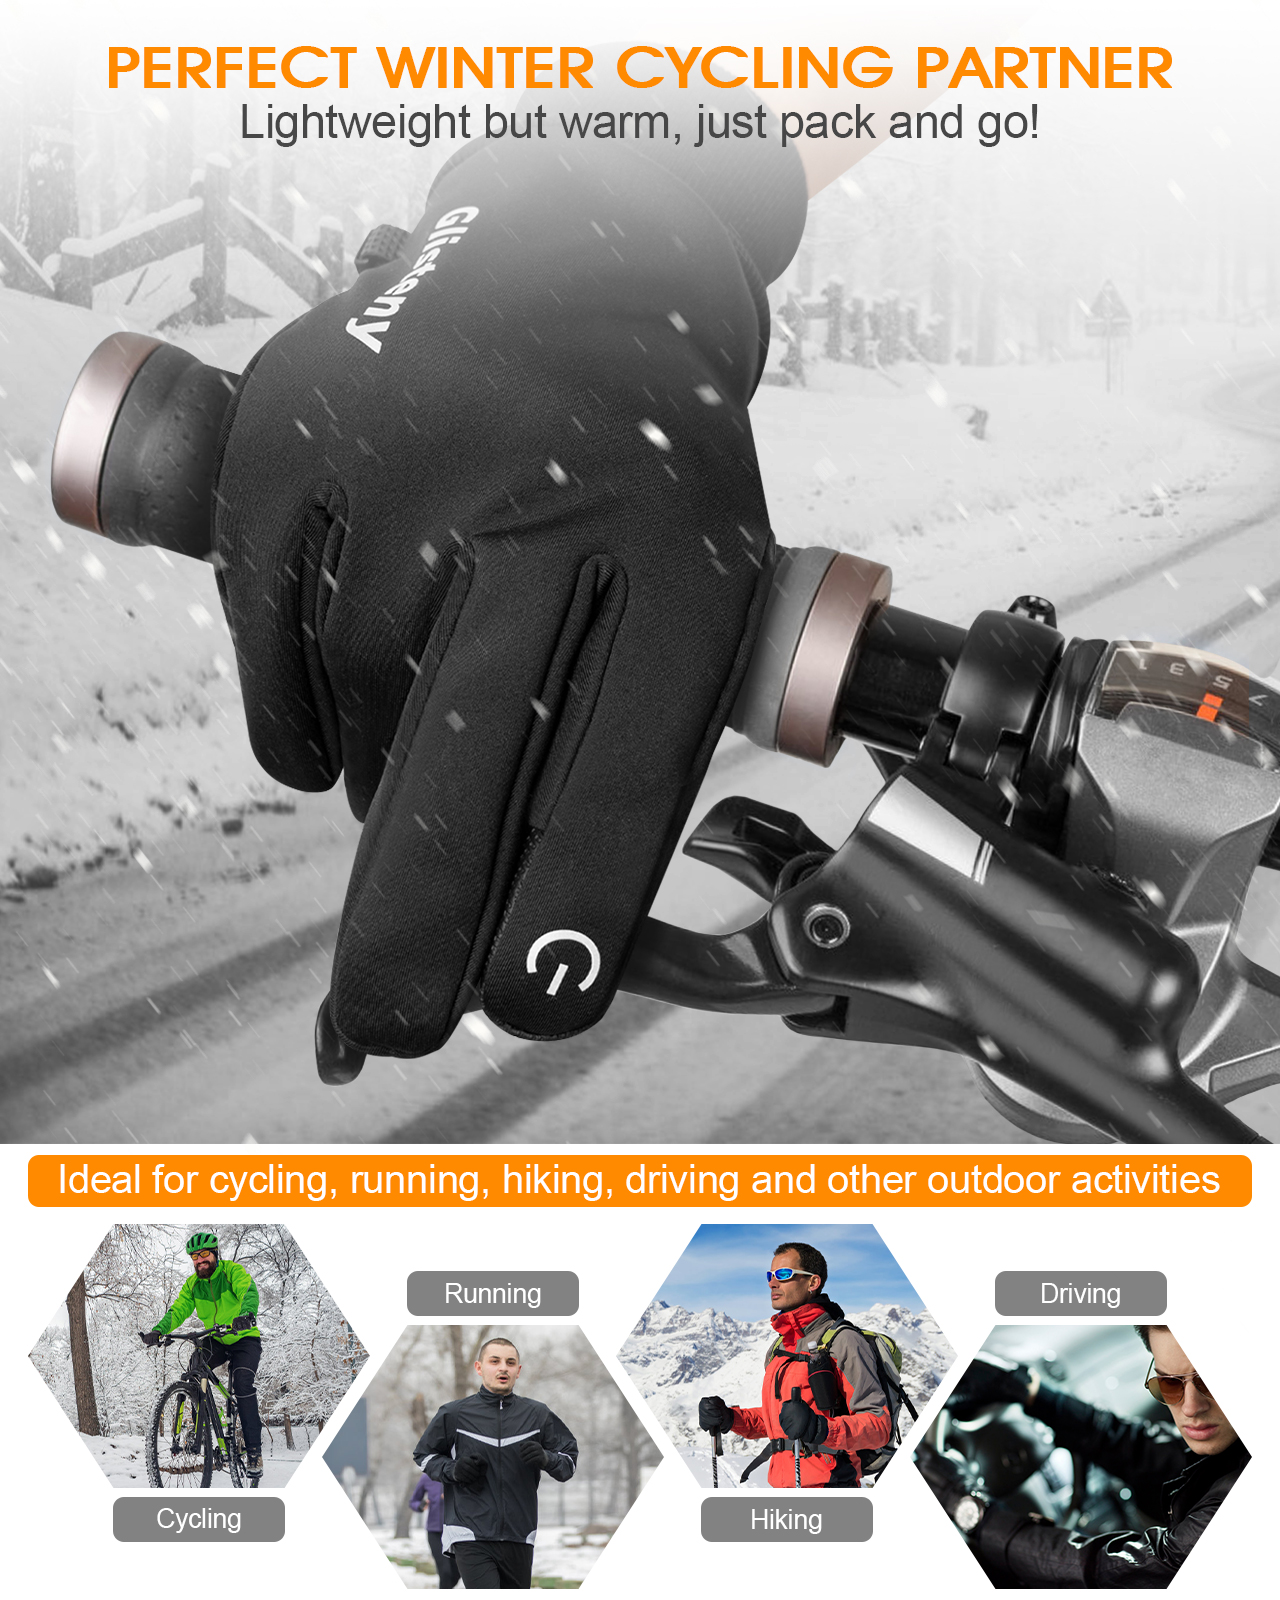 GLISTENY Winter Warm Waterproof Windproof Non-Slip Touch Screen Outdoors Motorcycle Riding Gloves